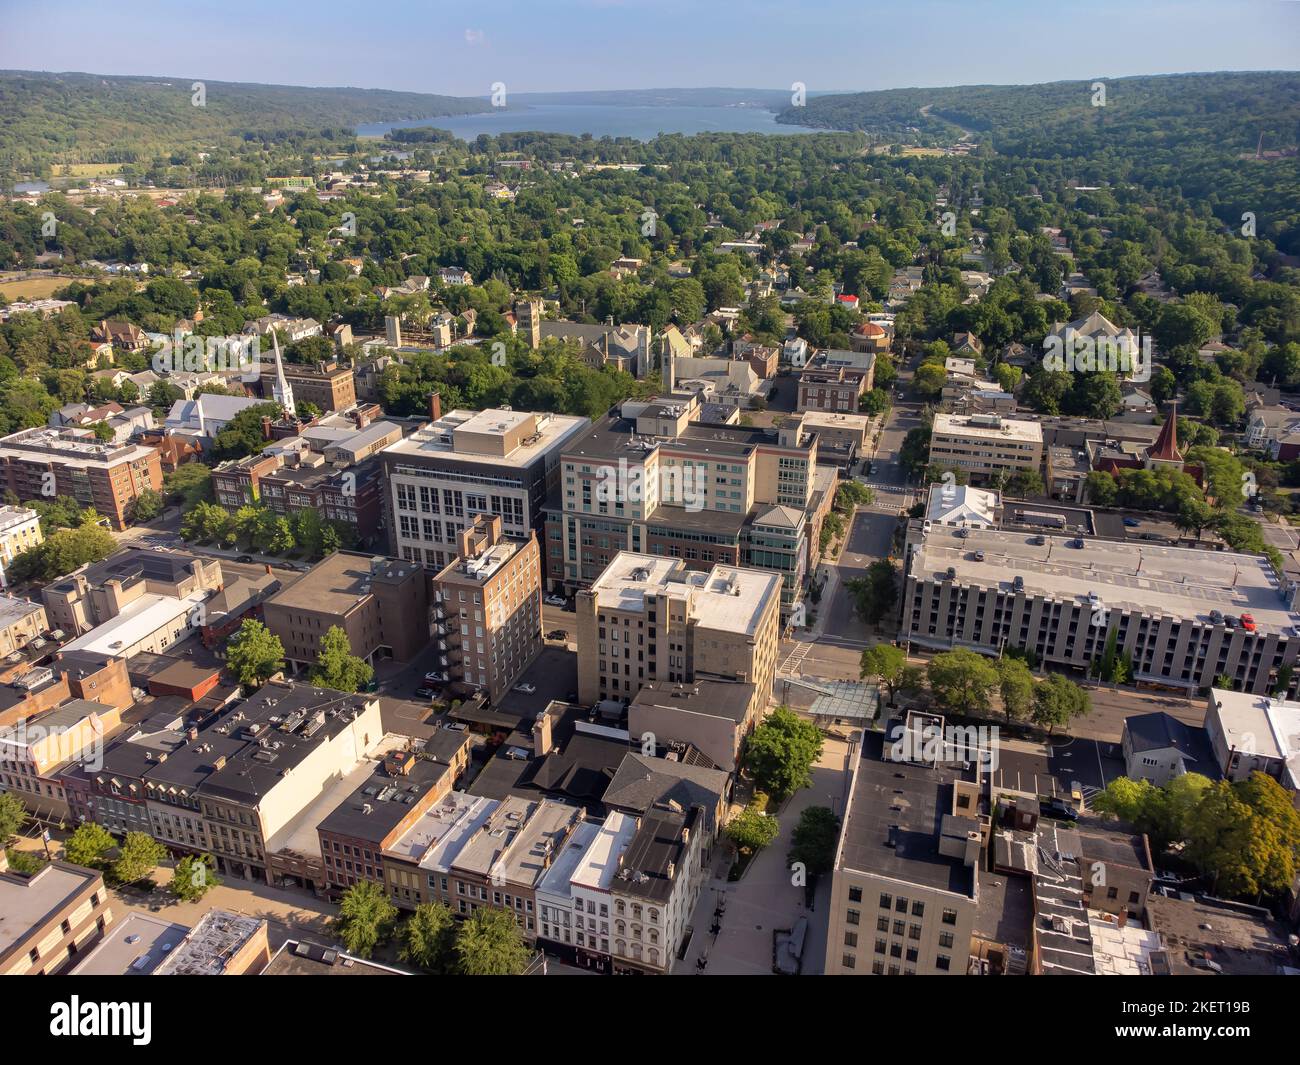 June 26 2022, Early morning aerial summer image of the area surrounding the City of Ithaca, NY, USA Stock Photo